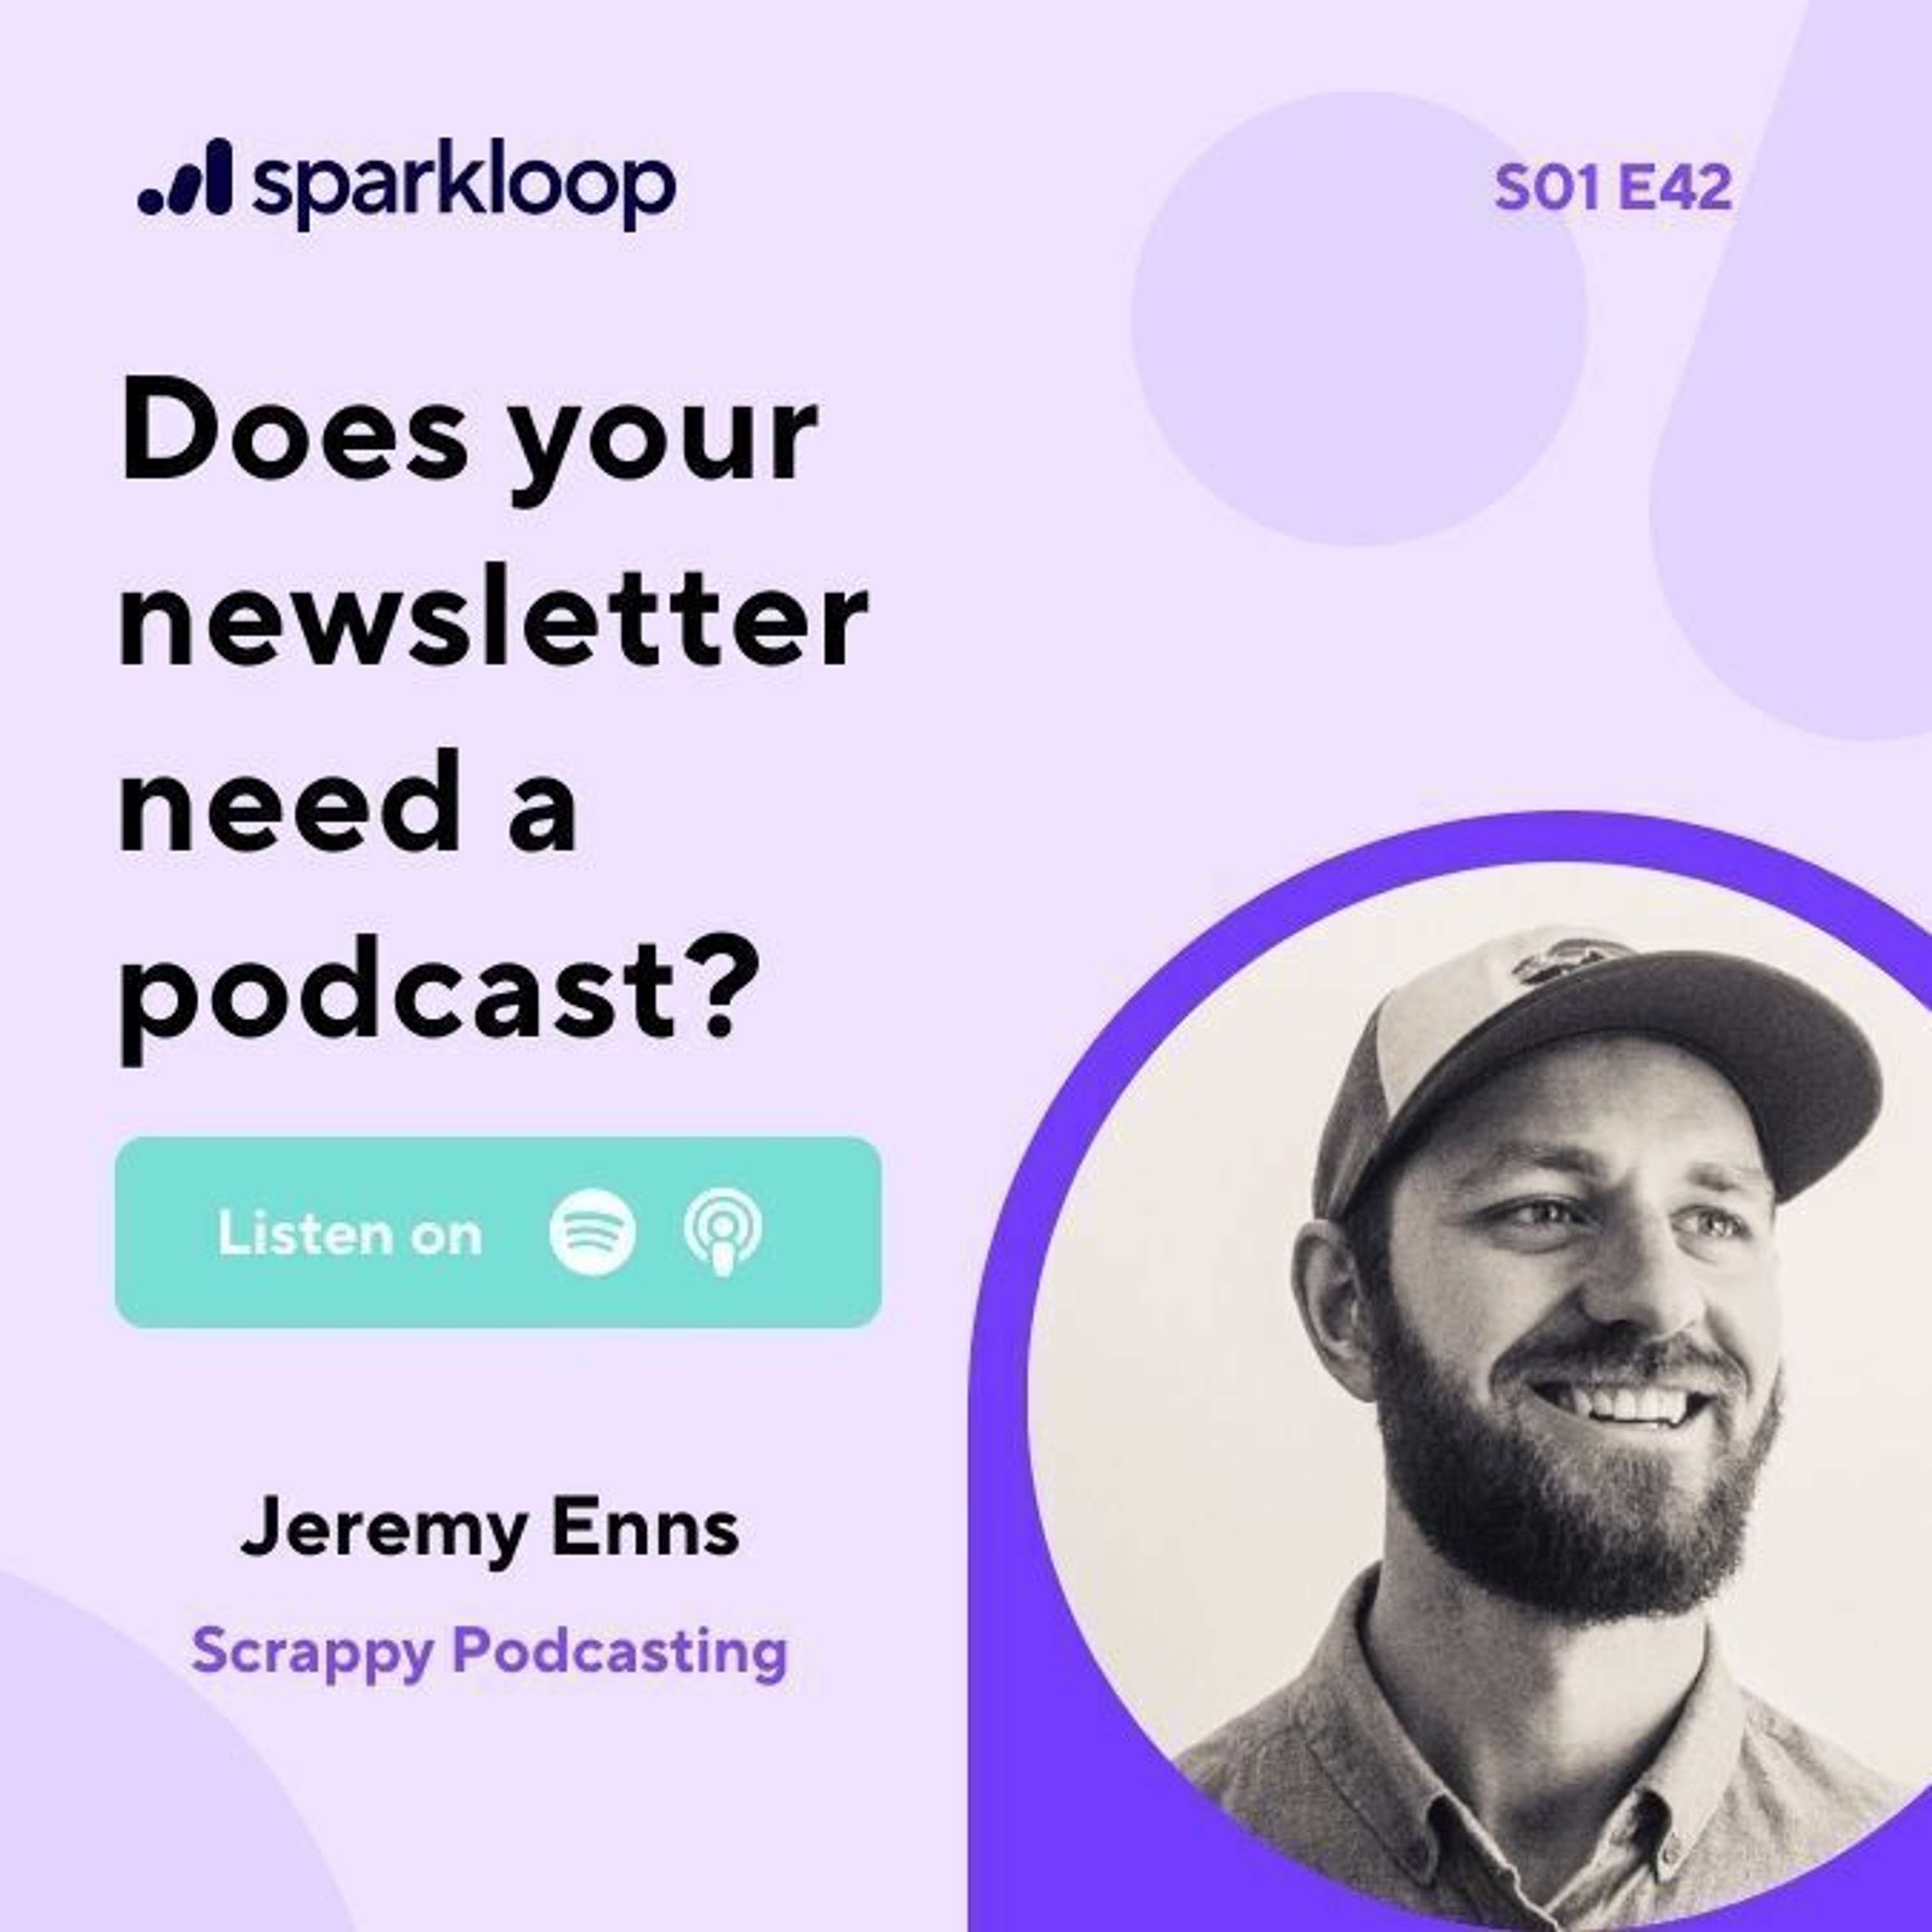 Does your newsletter need a podcast? With Jeremy Enns of Scrappy Podcasting